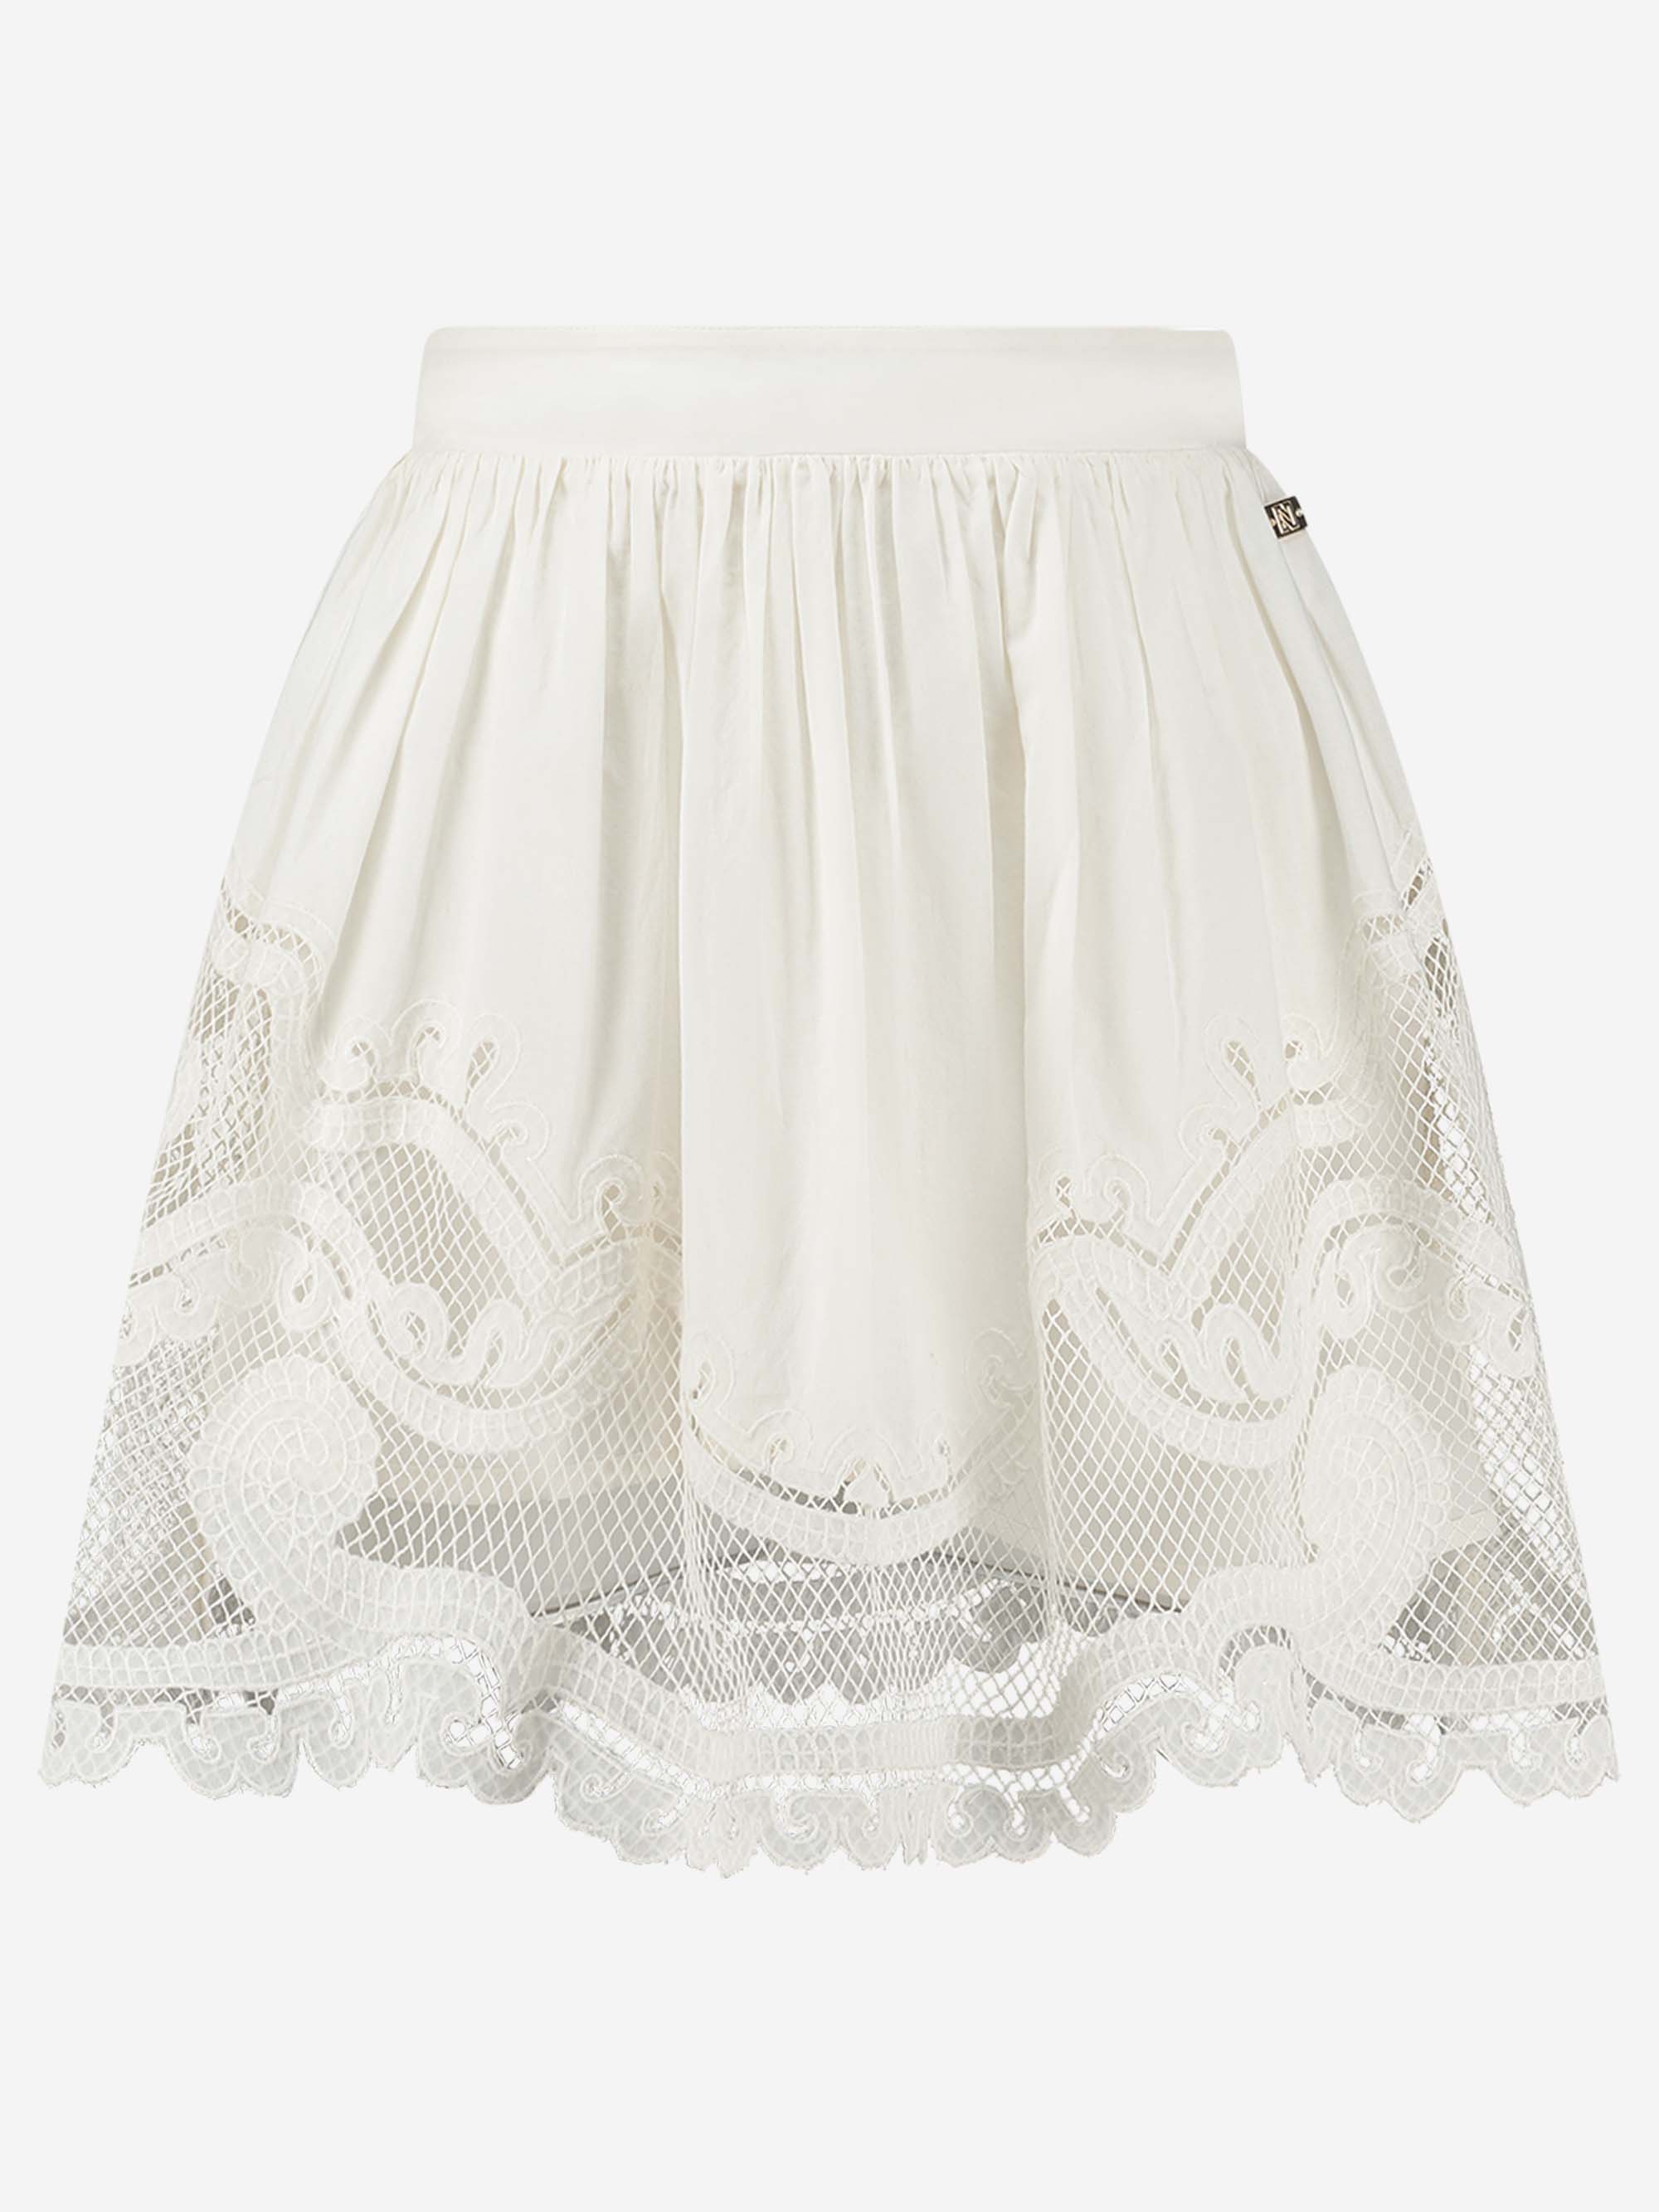 Laced skirt